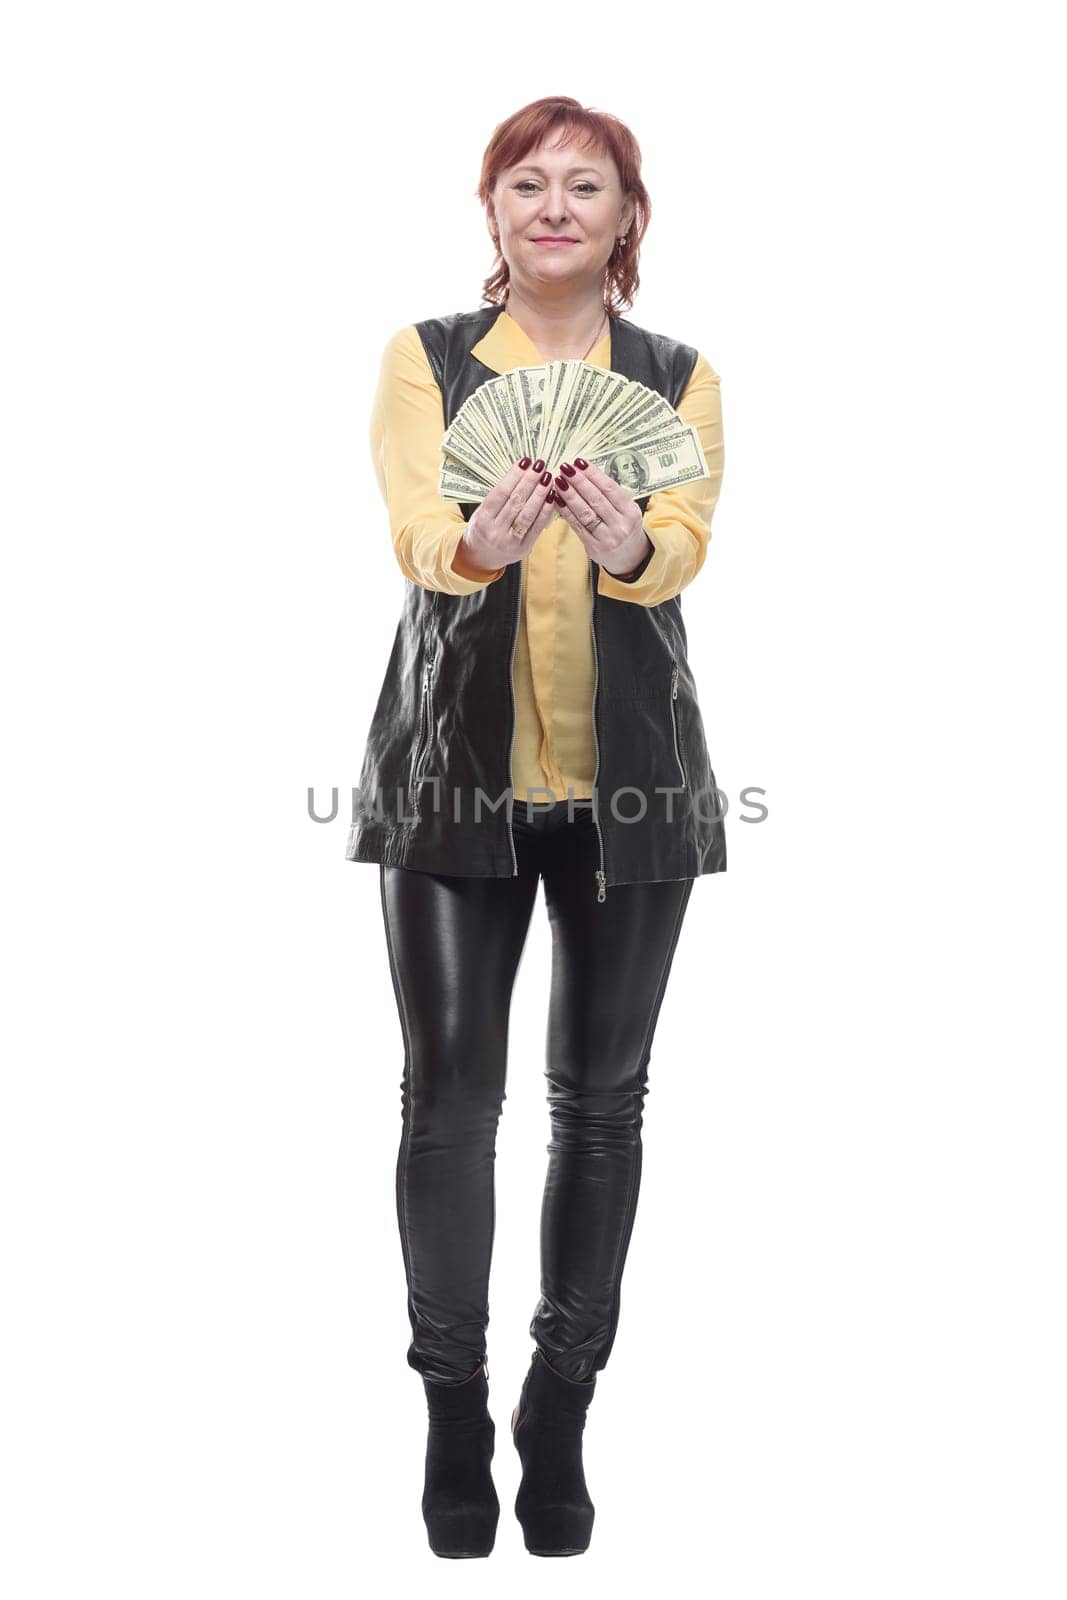 happy mature woman with a fan of banknotes. isolated on a white background.